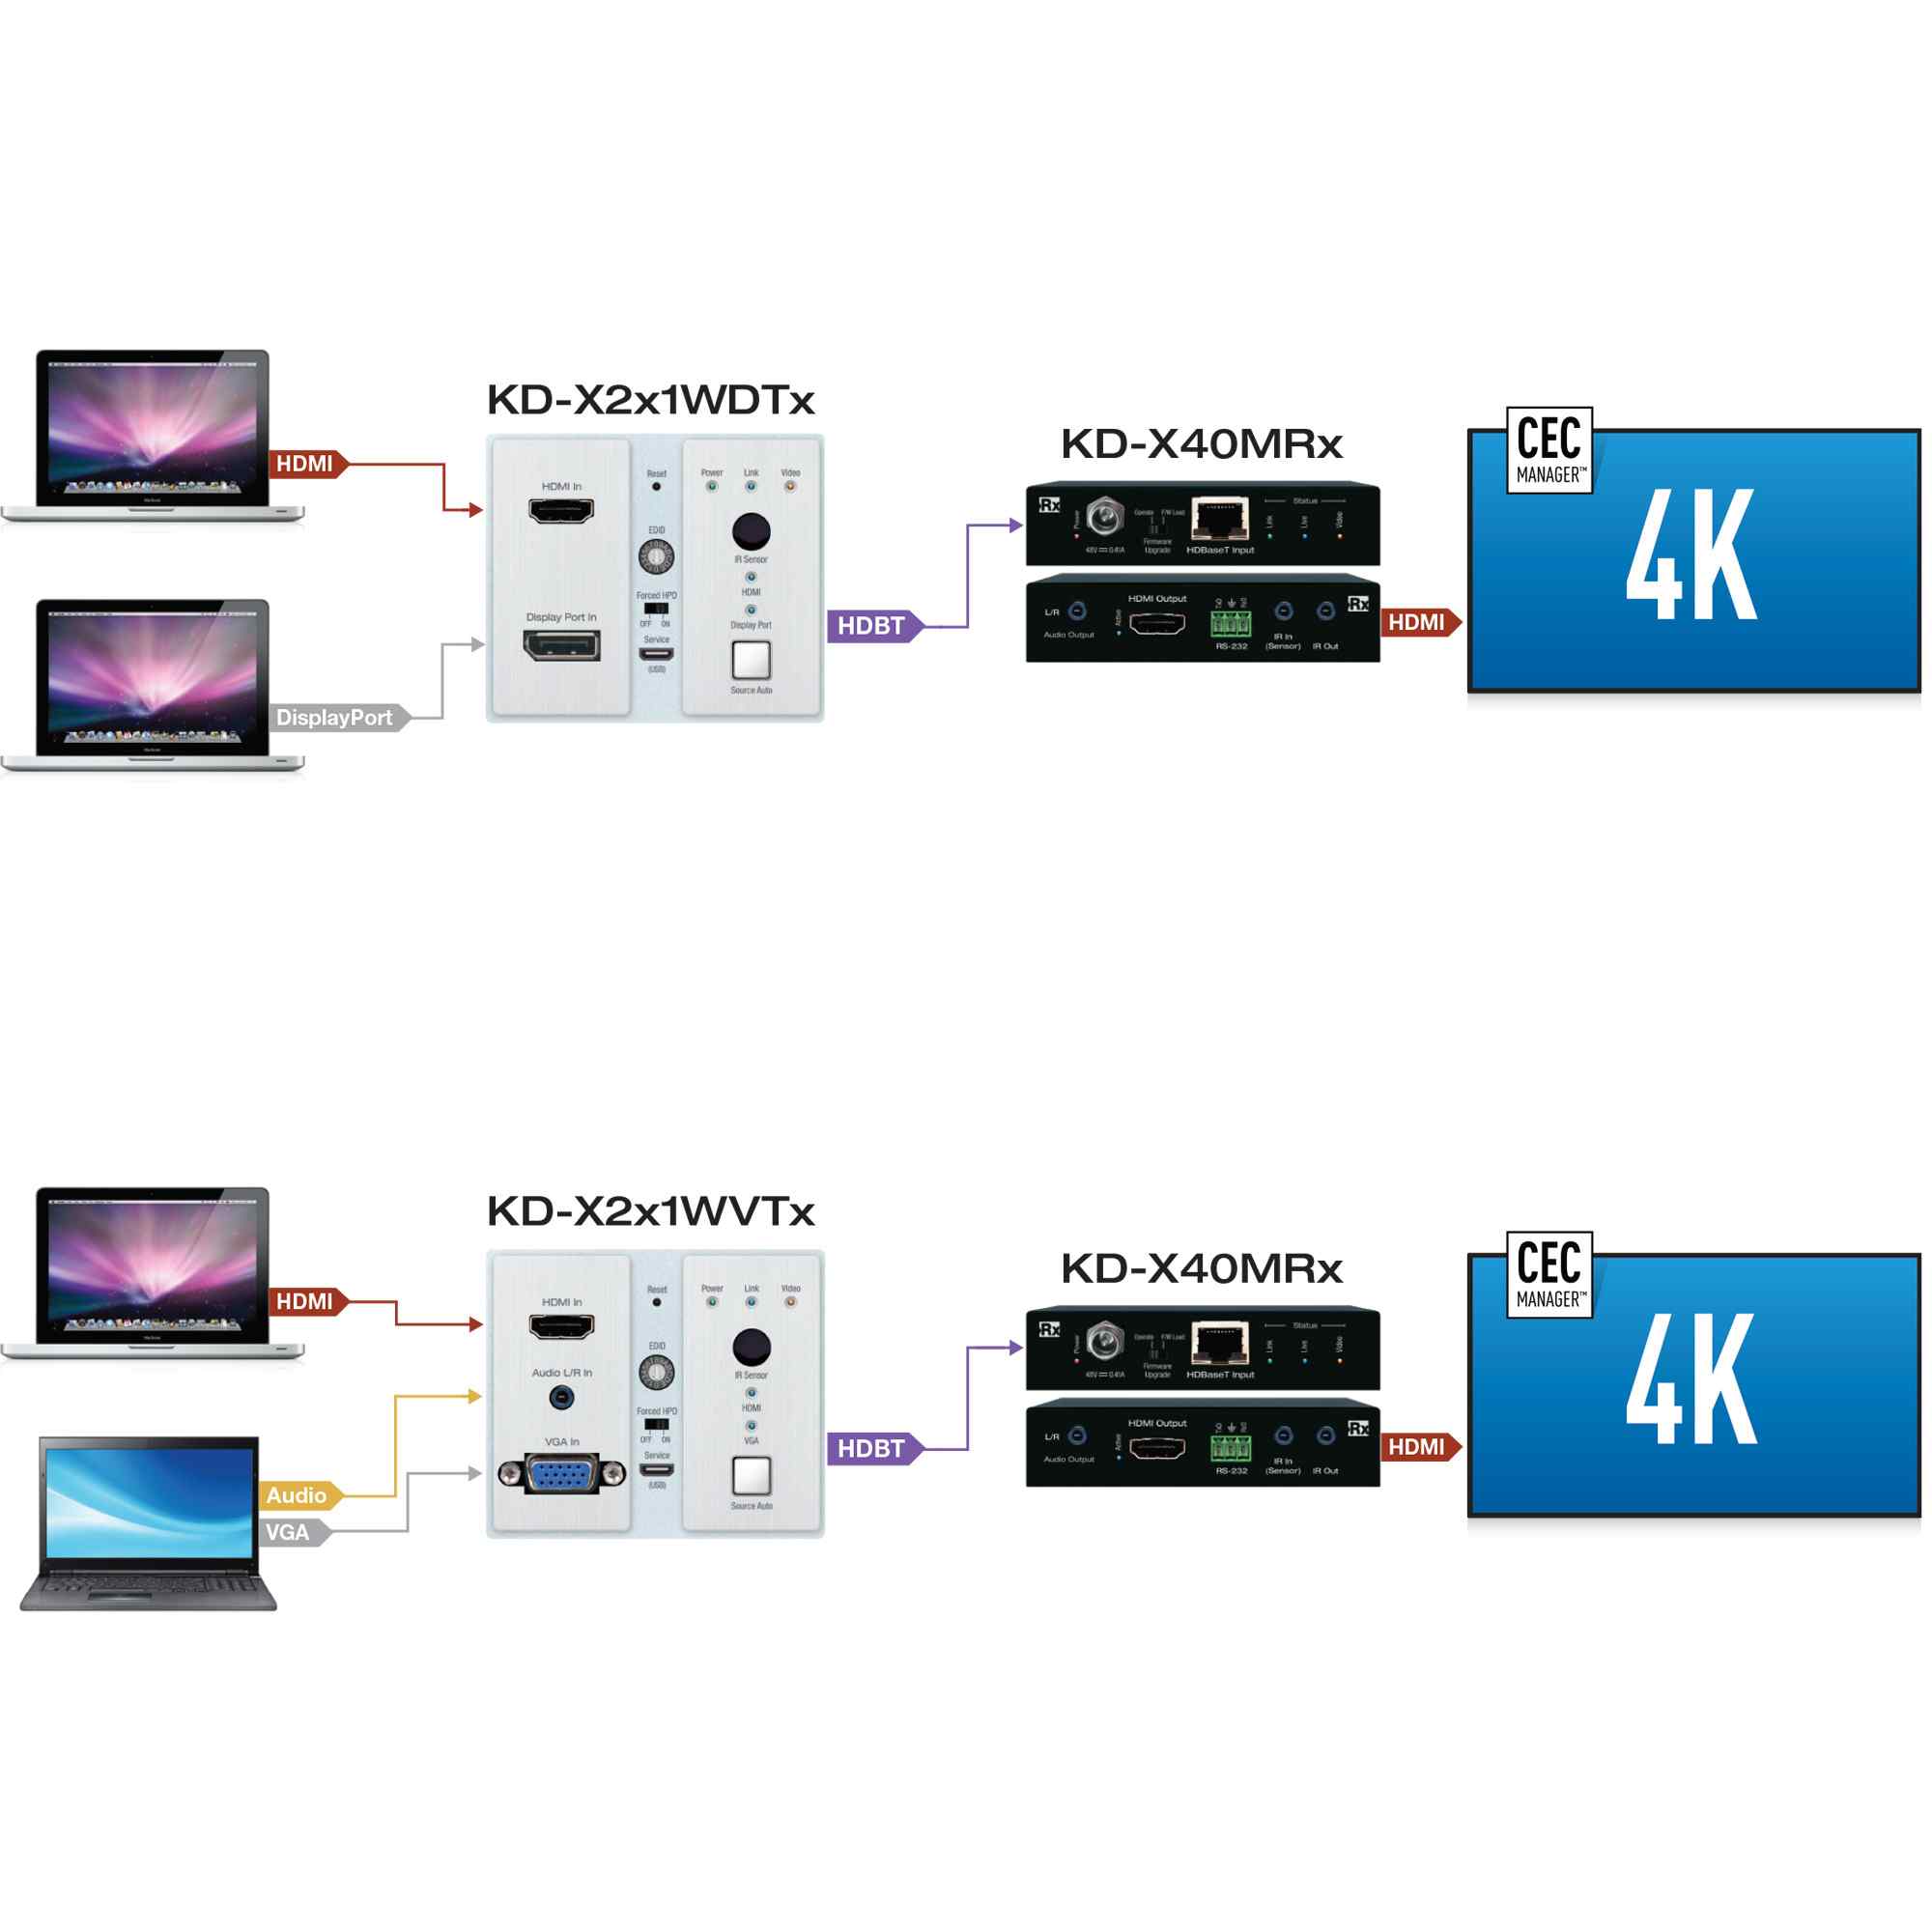 Thumbnail of hdbaset receiver for controlling remotely located equipment